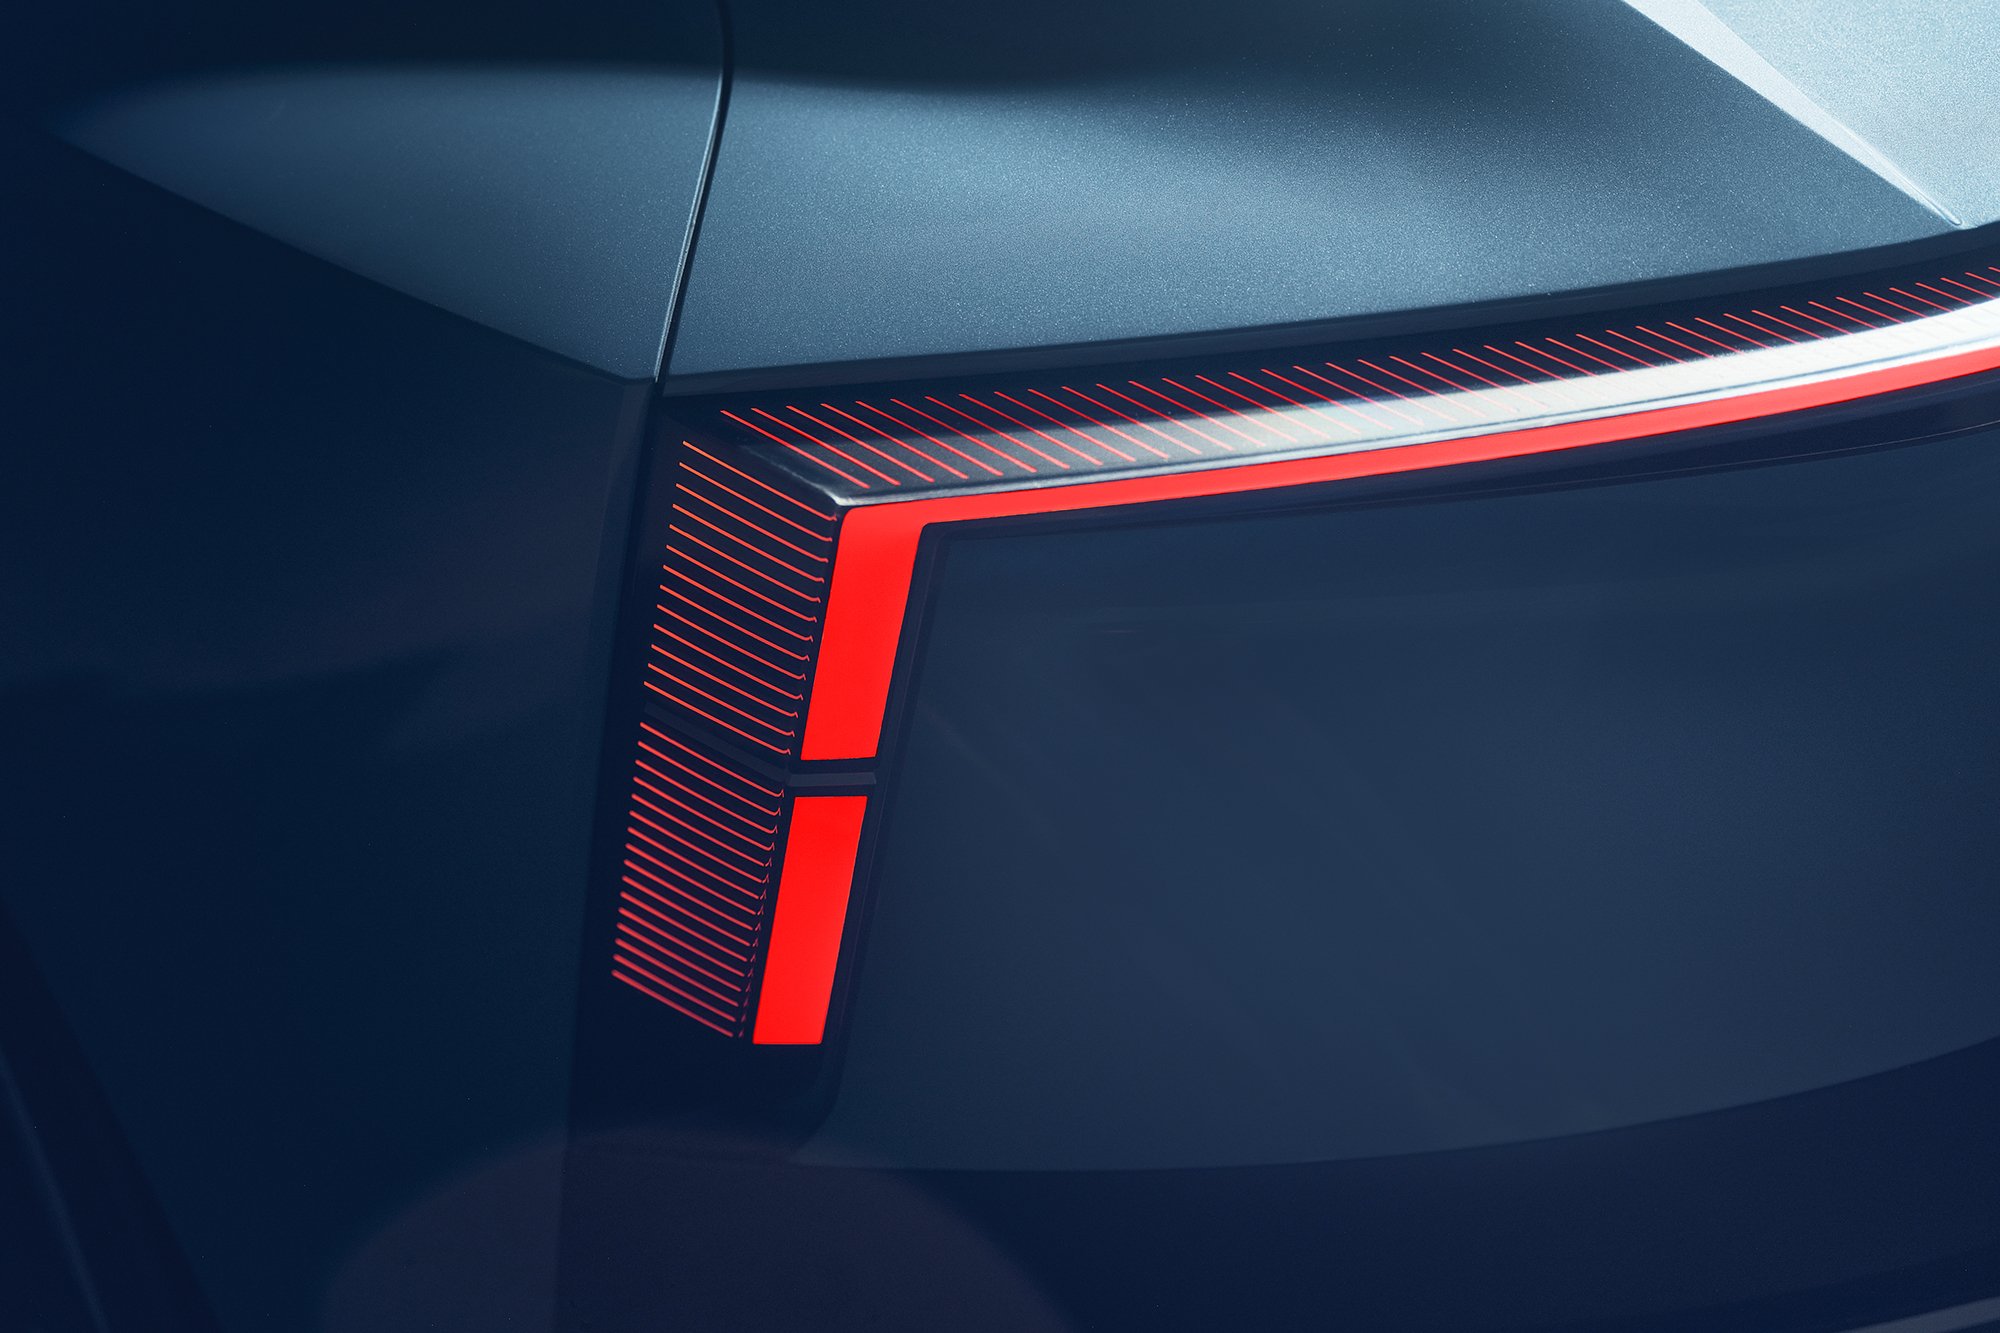 The rear lights of the electric roadster Polestar 02